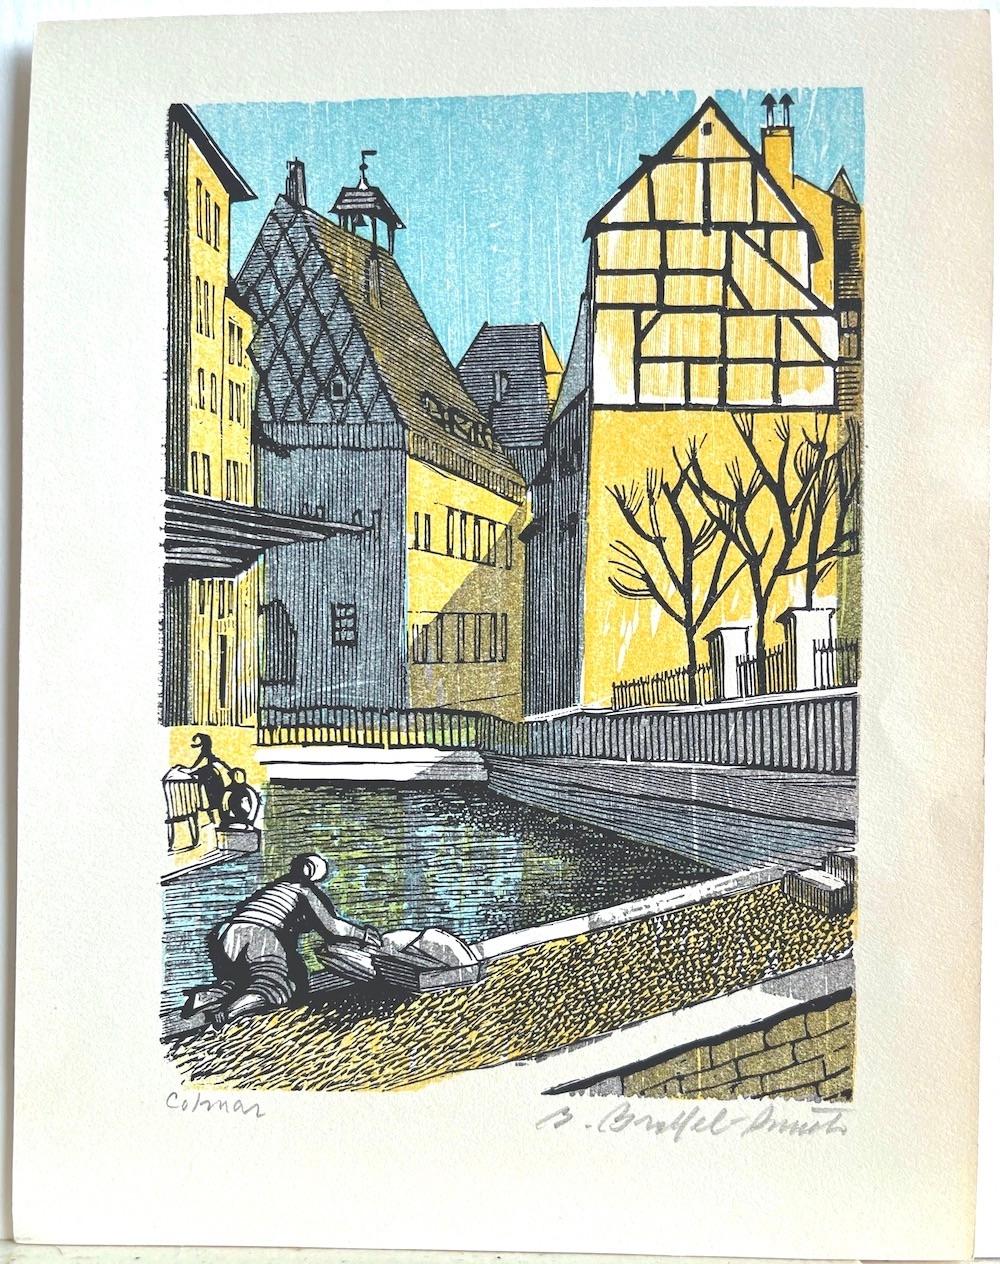 COLMAR Signed Wood Engraving, French Village, Little Venice Half-Timbered Houses - Realist Print by Bernard Brussel-Smith